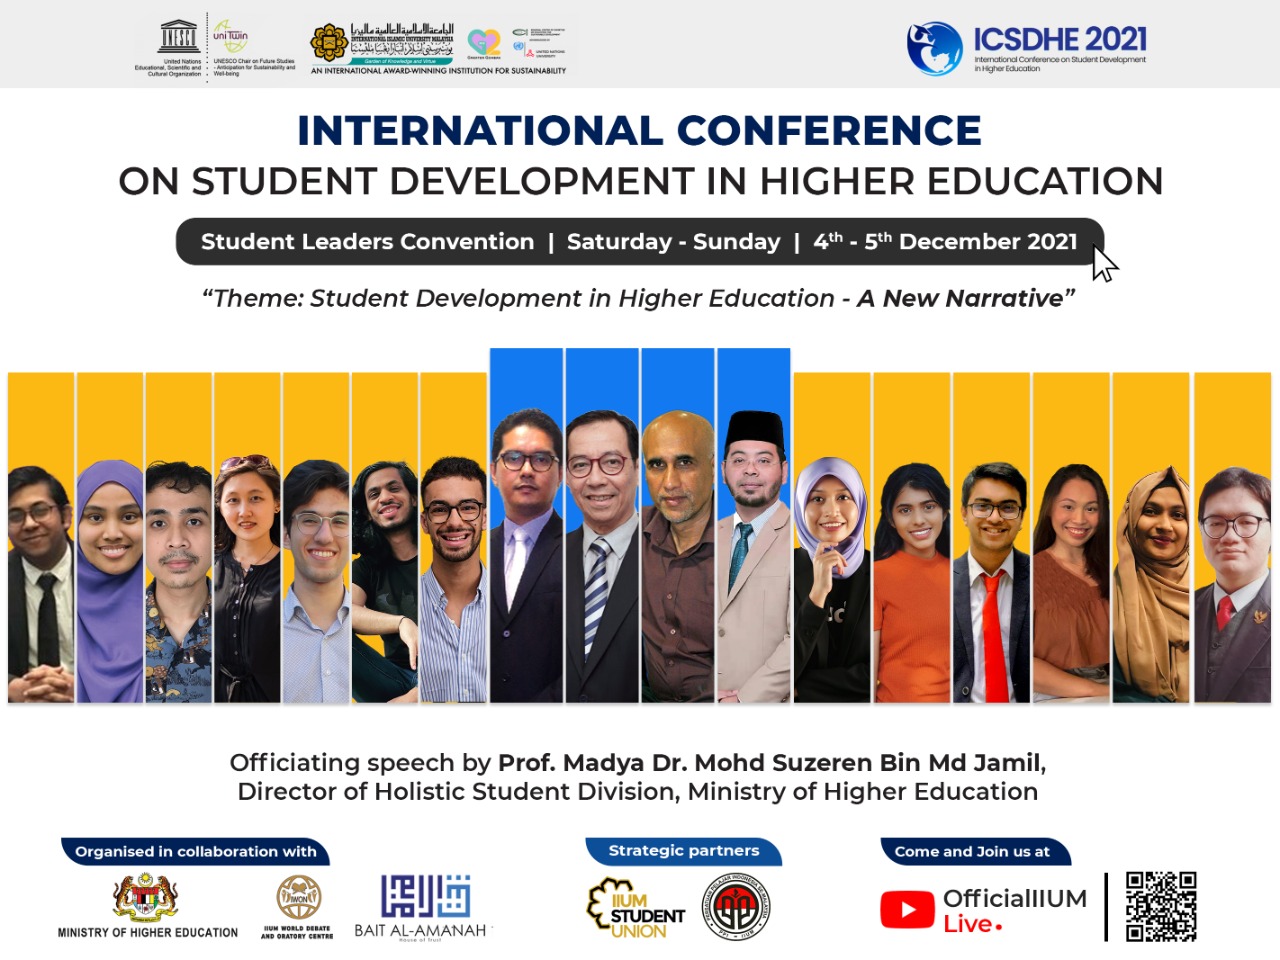 INTERNATIONAL CONFERENCE ON STUDENT DEVELOPMENT IN HIGHER EDUCATION